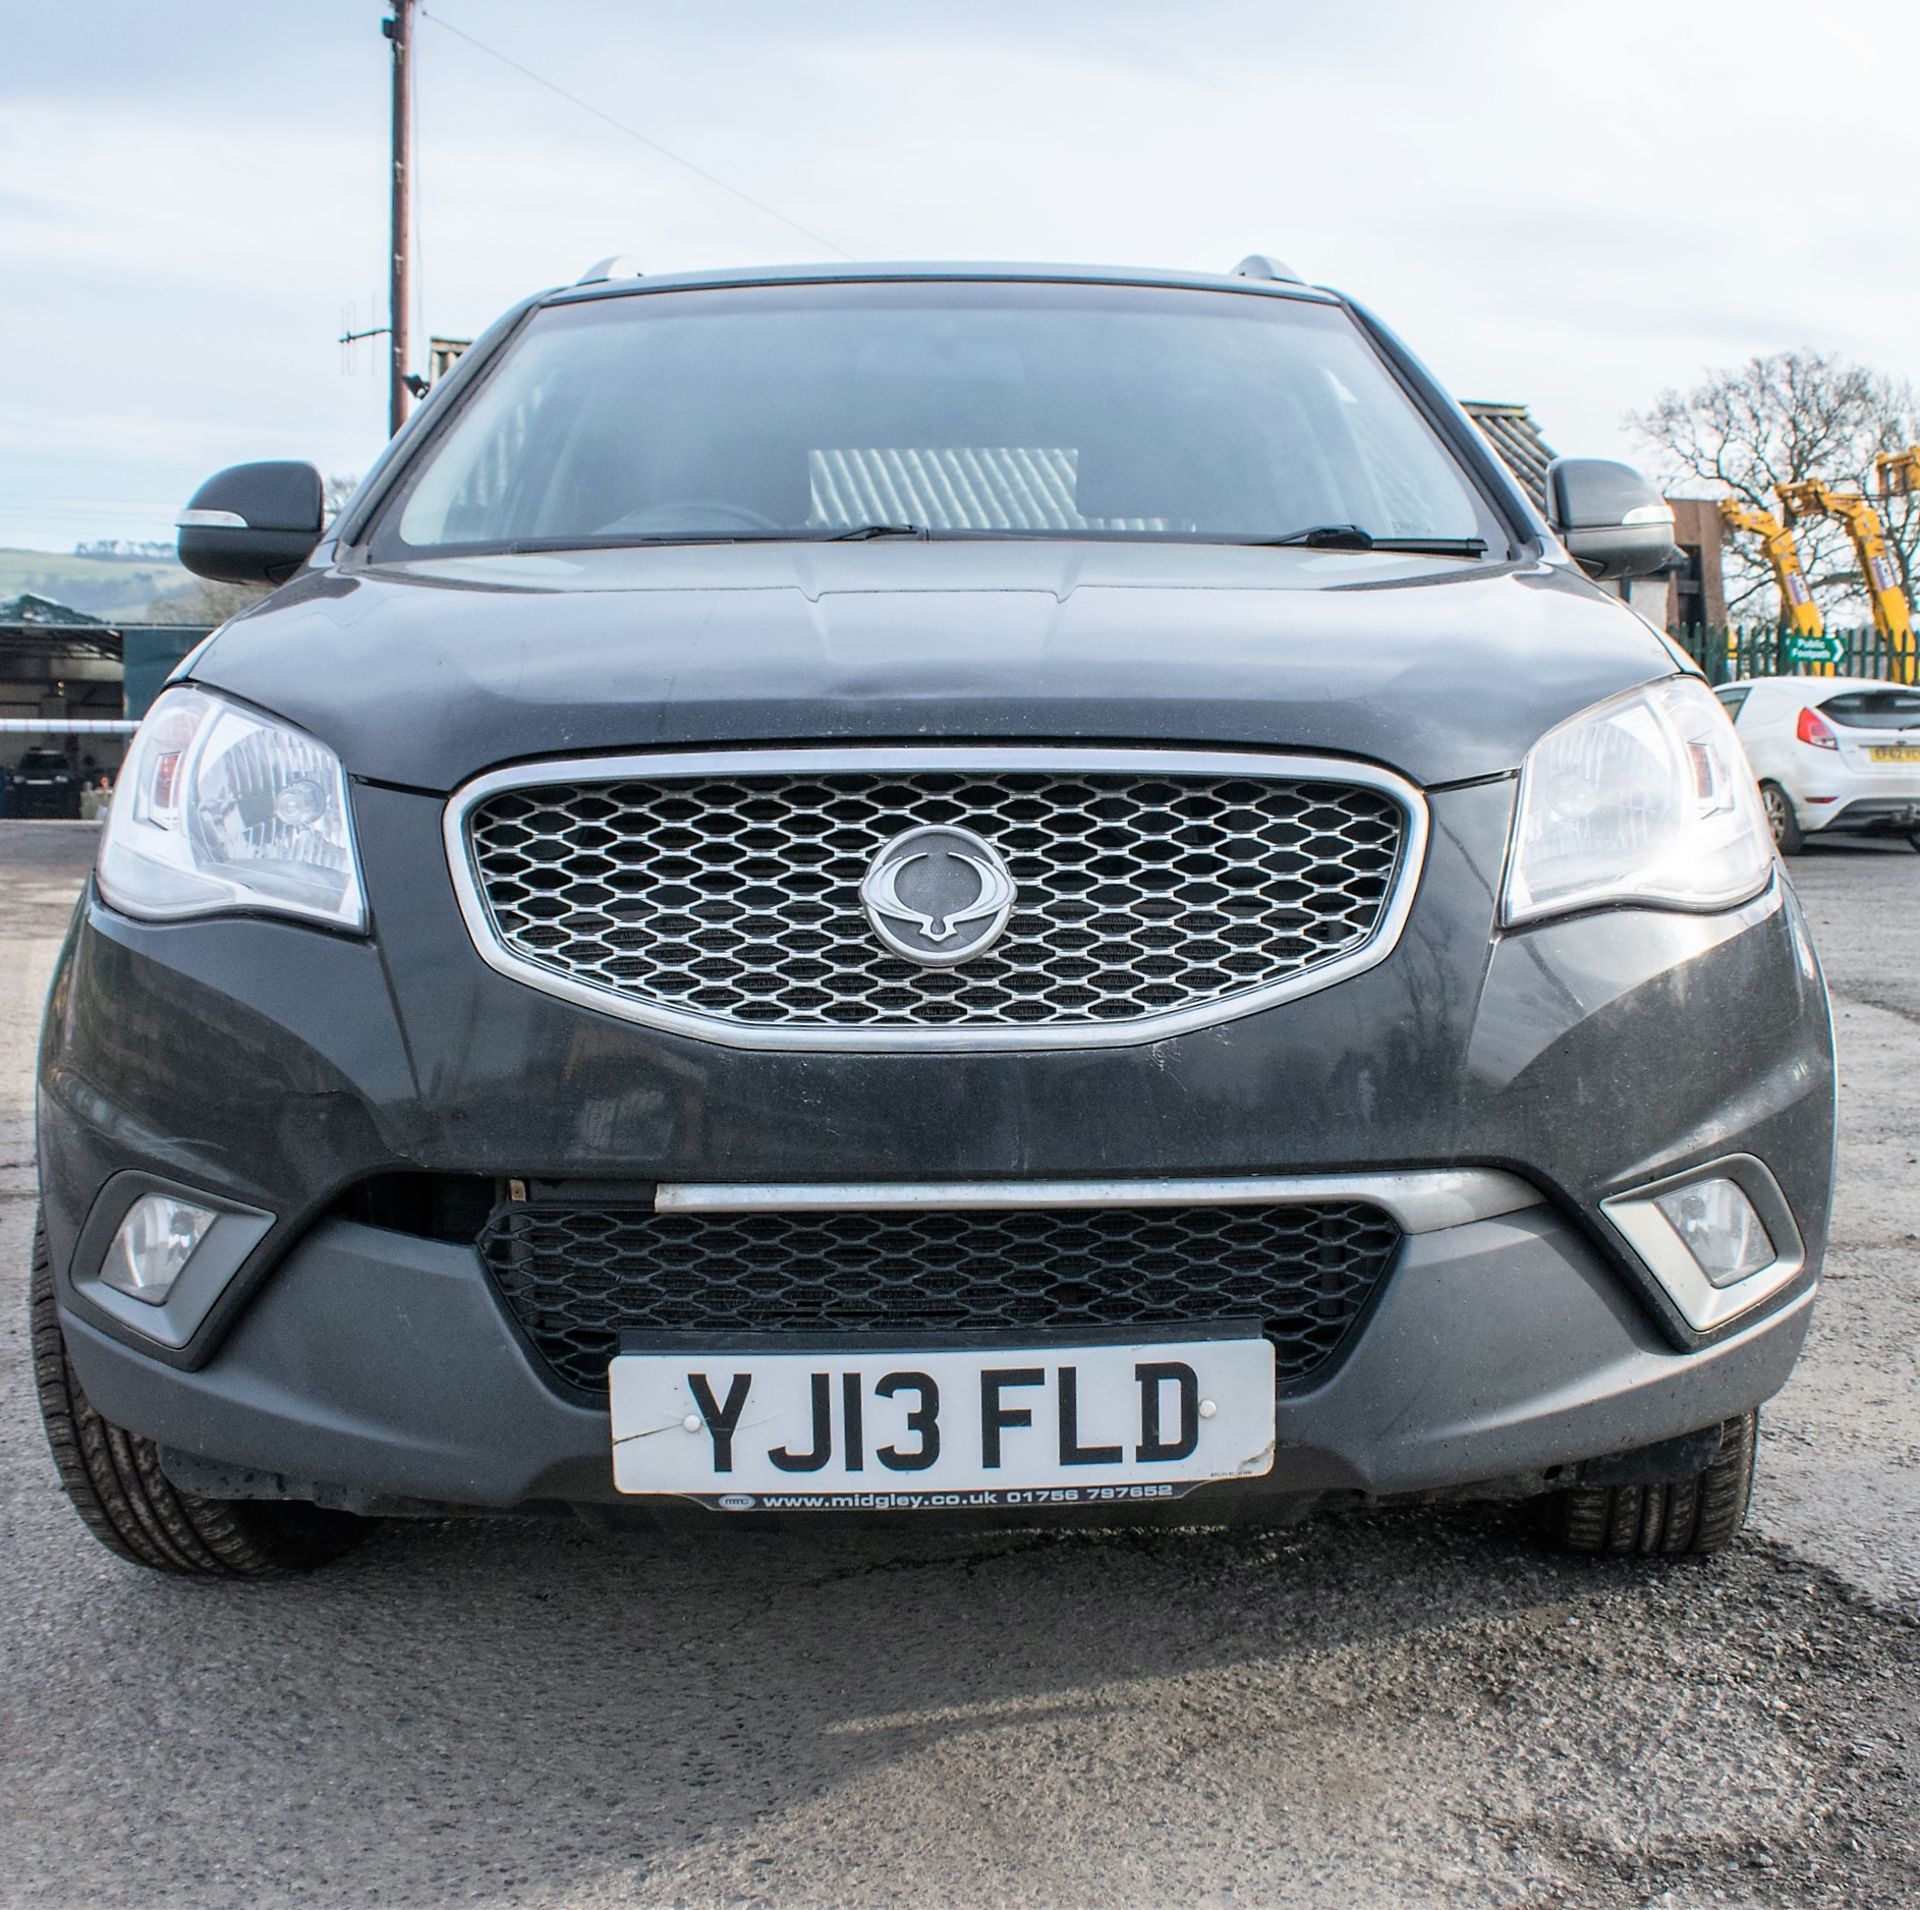 Ssangyong Korando CSX AWD light 4x4 utility good vehicle. Registration number: YJ13 FLD Date of - Image 5 of 23